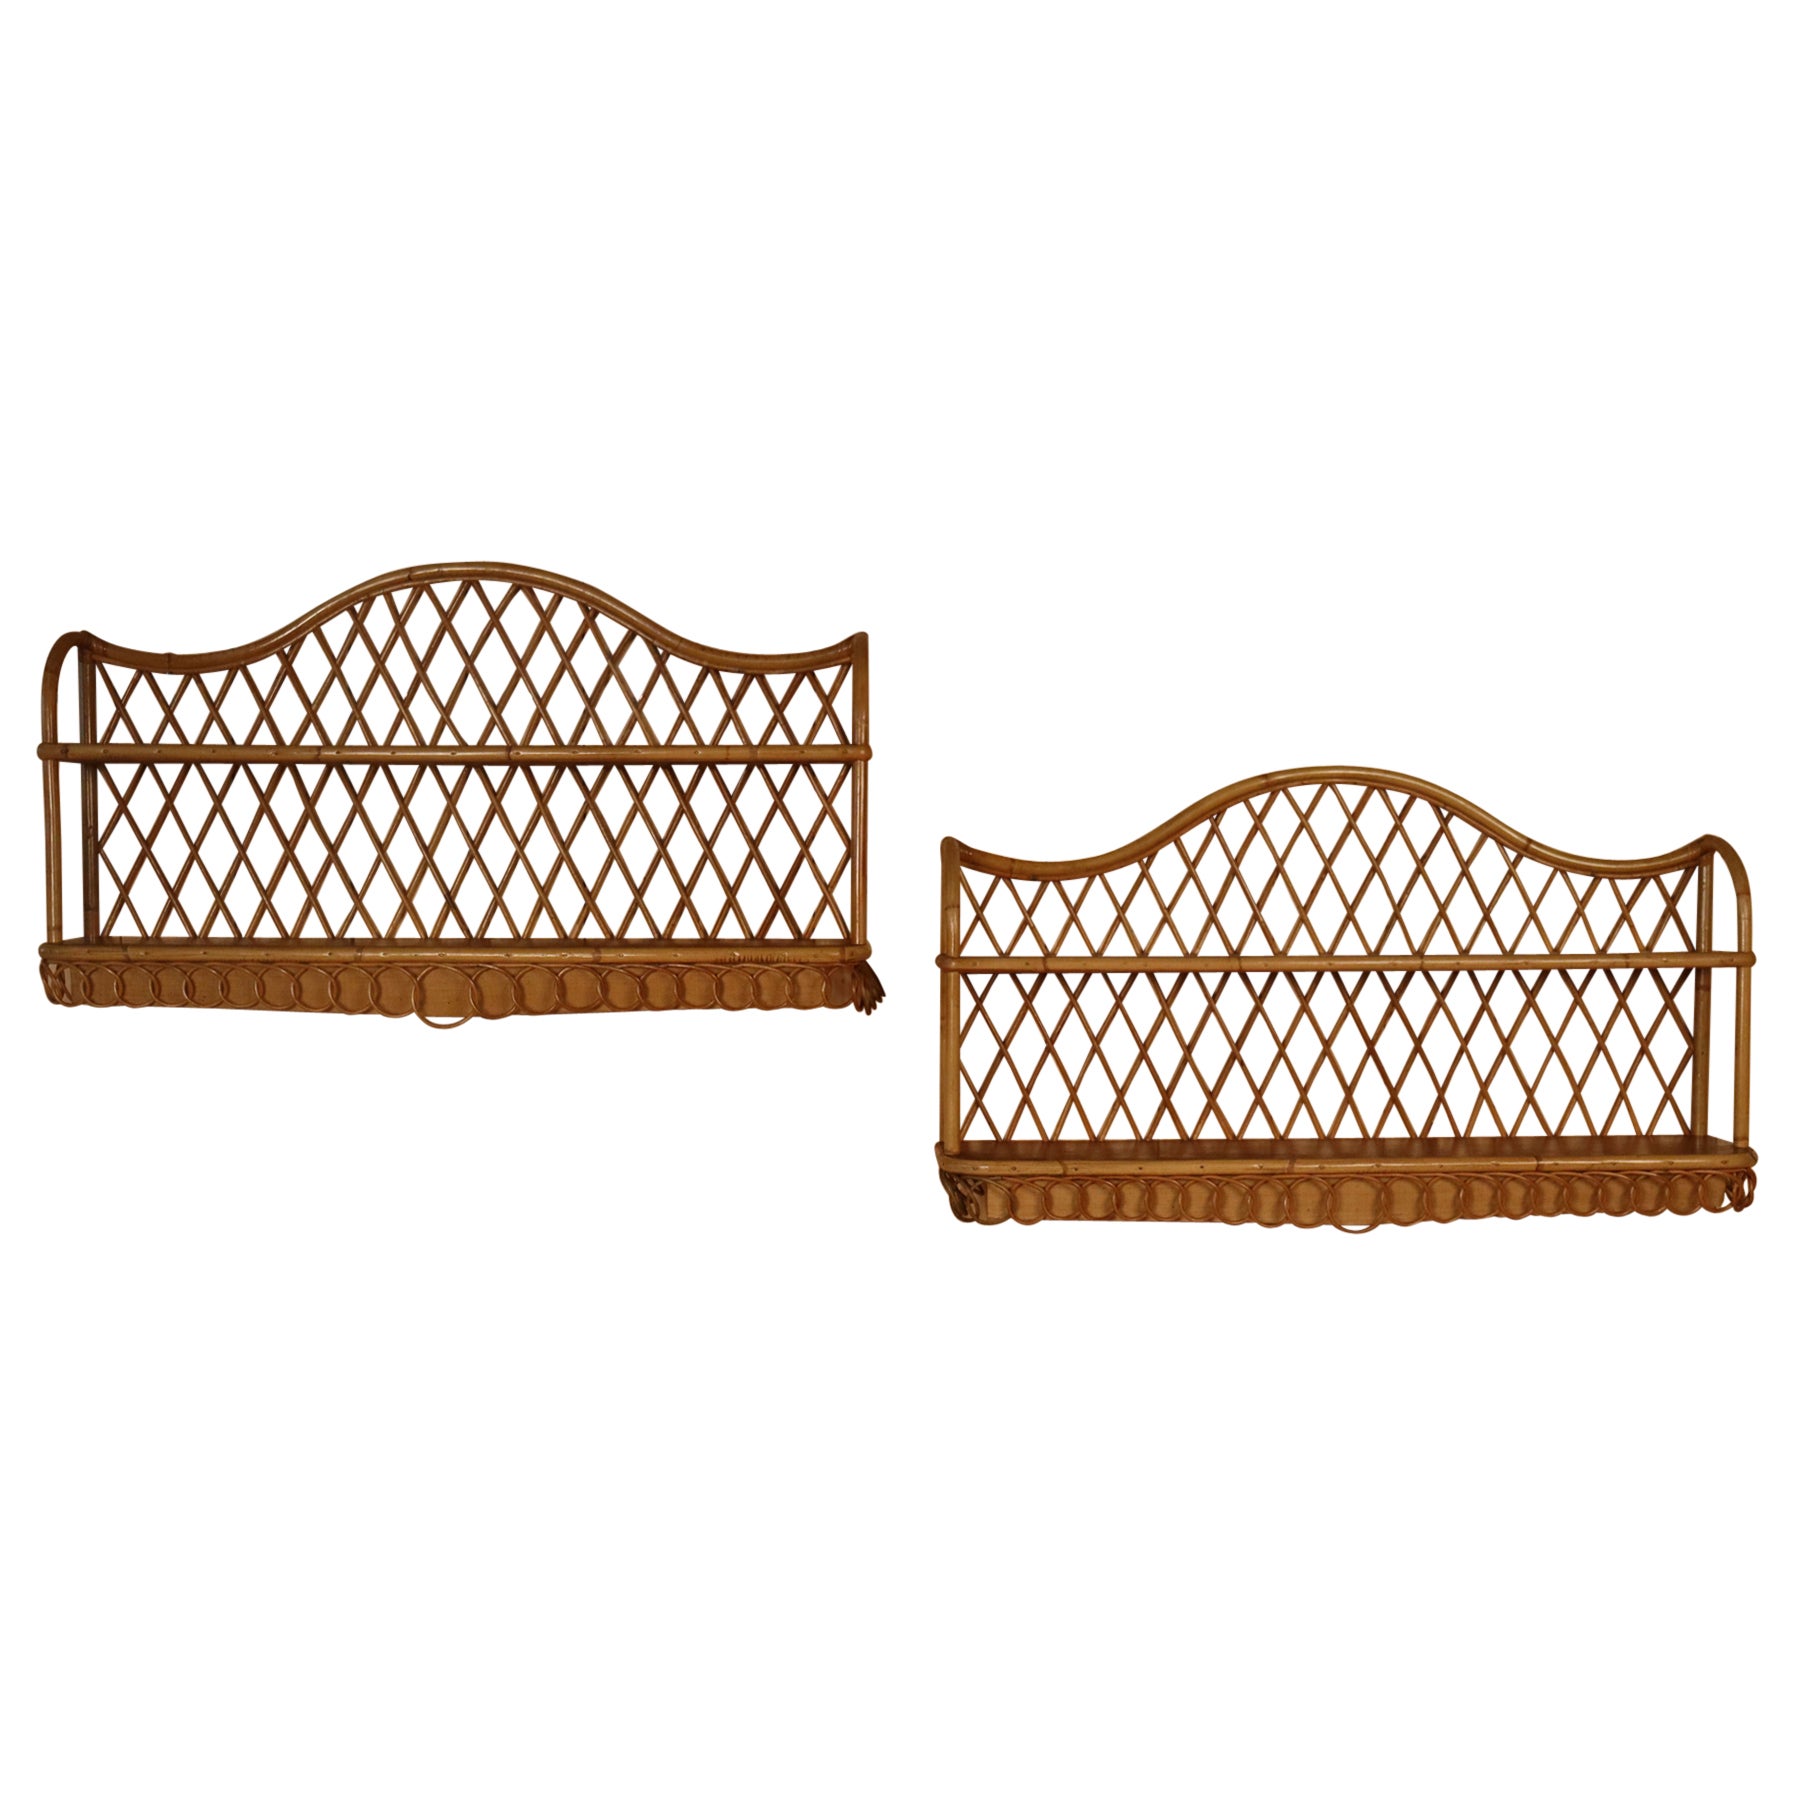 Rattan Wall Shelves by Adrien Audoux & Frida Minet, 1960, Set of 2 For Sale